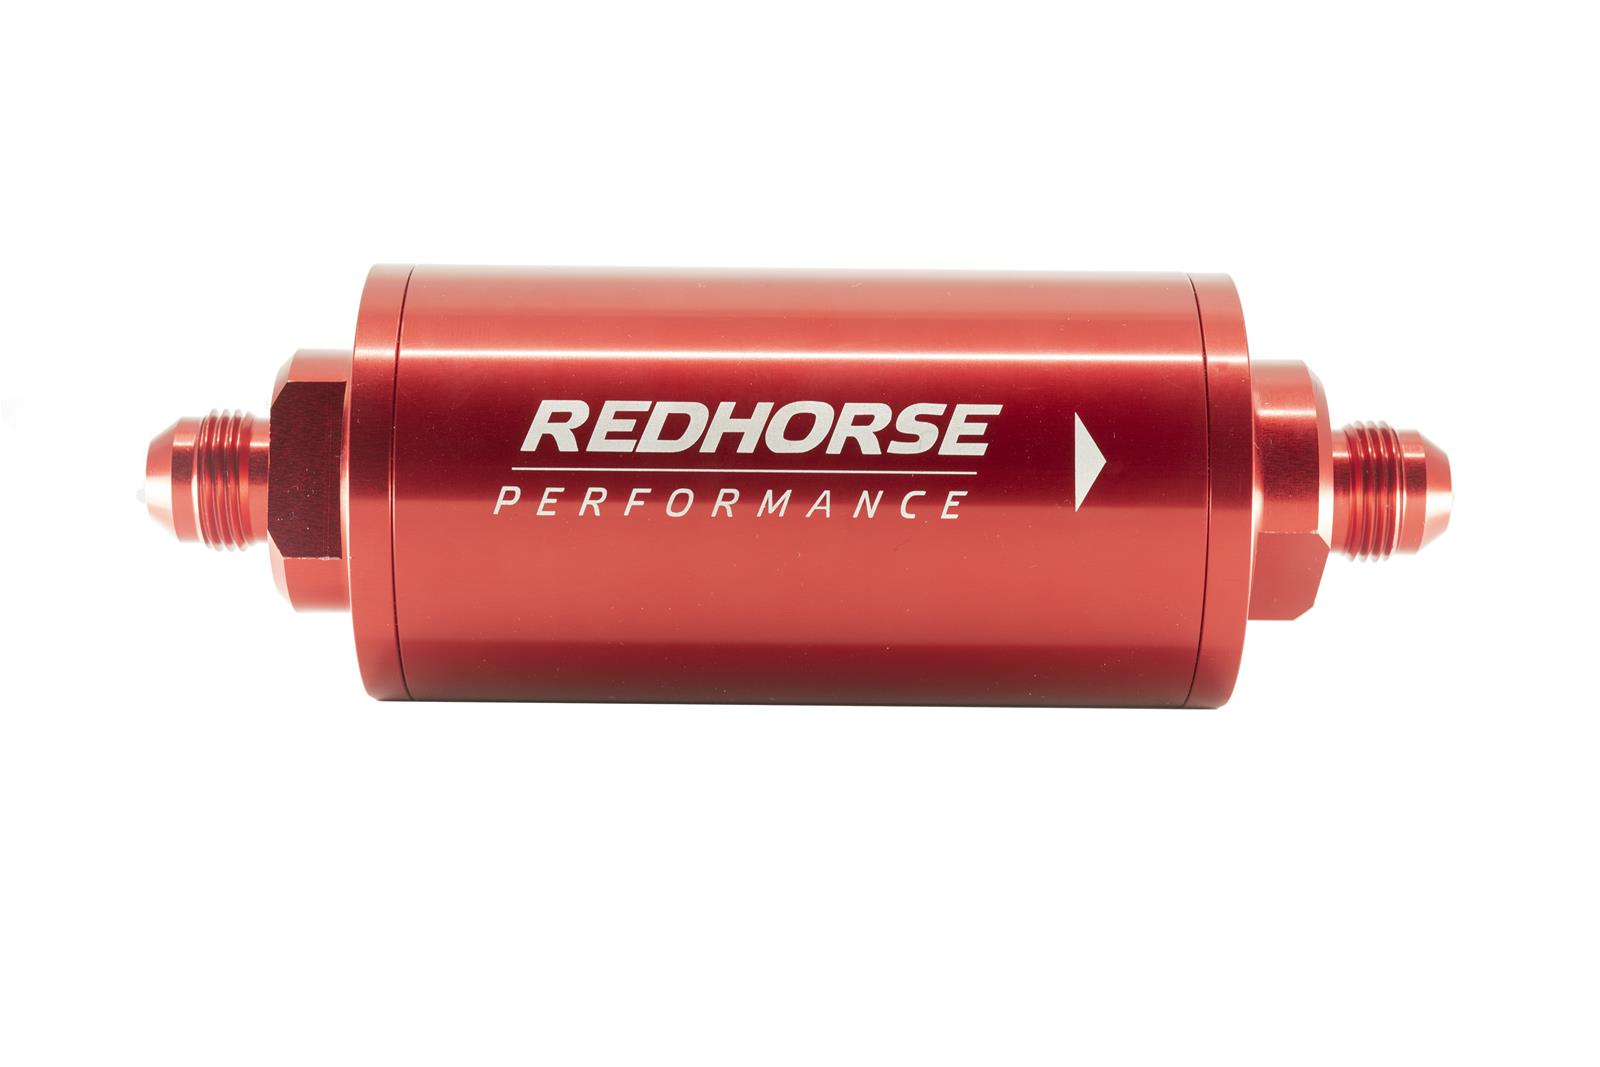 Redhorse Performance 4651-06-3-100 6in Cylindrical In-Line Race Fuel Filter w/ 100 Micron S.S. element - 06 AN - Red